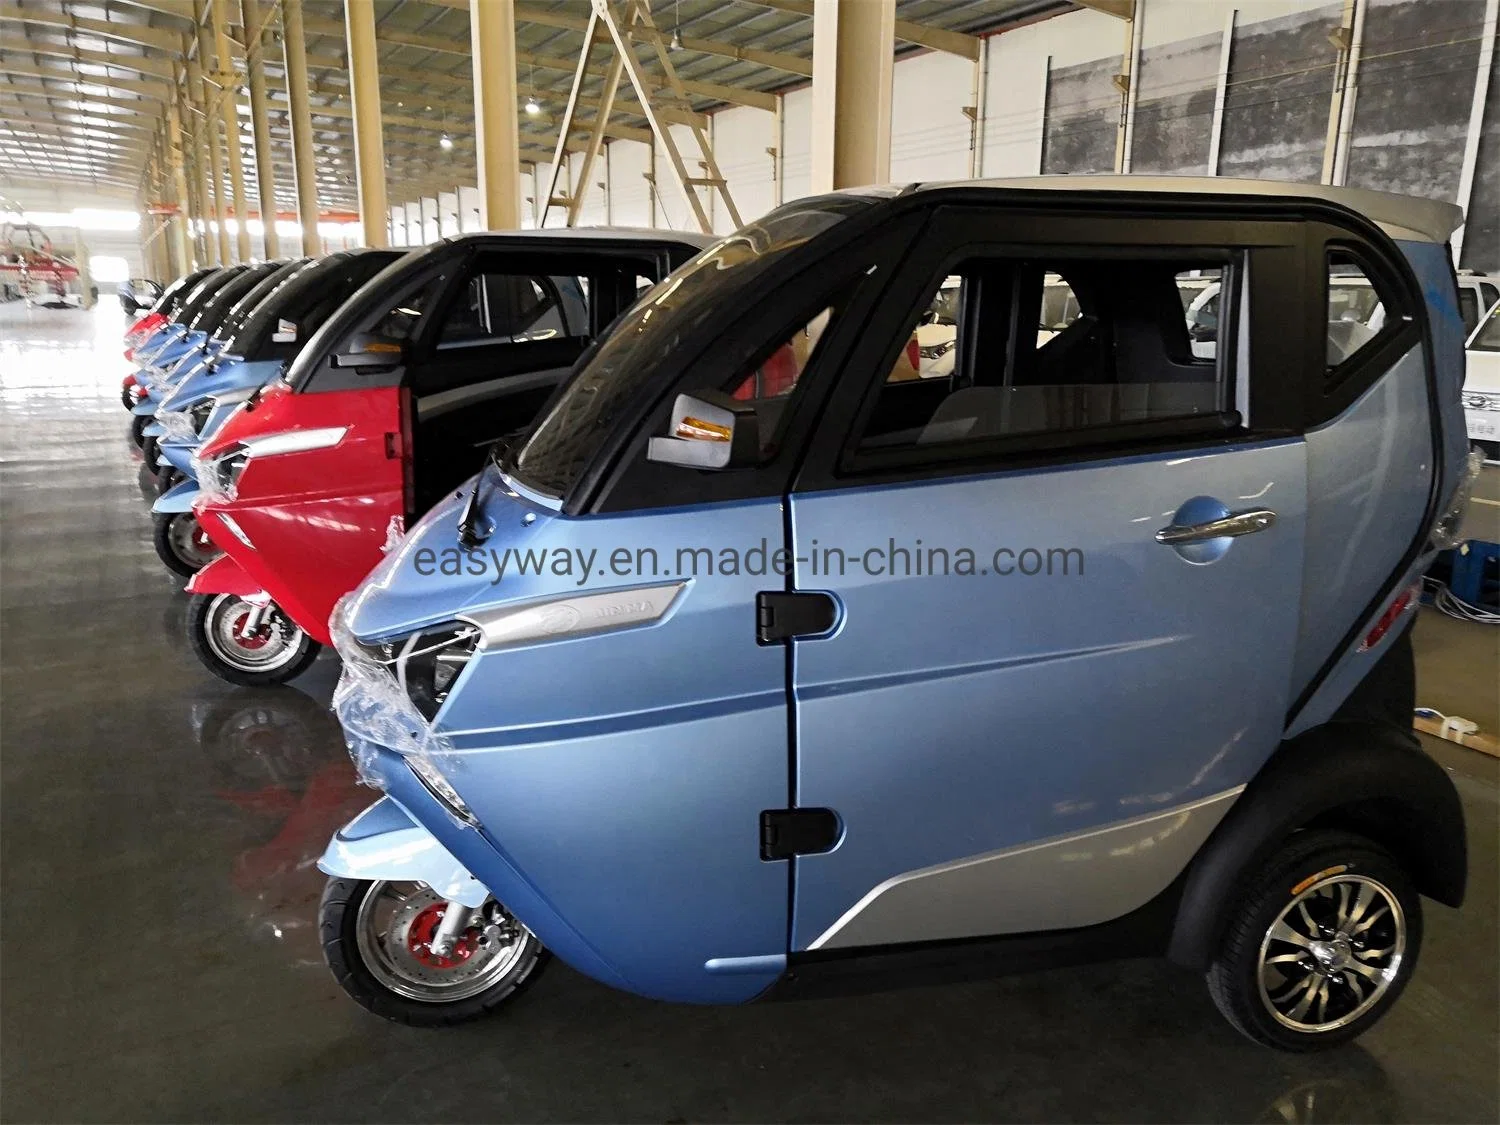 Fashionable Electric Vehicle with Lithium Battery